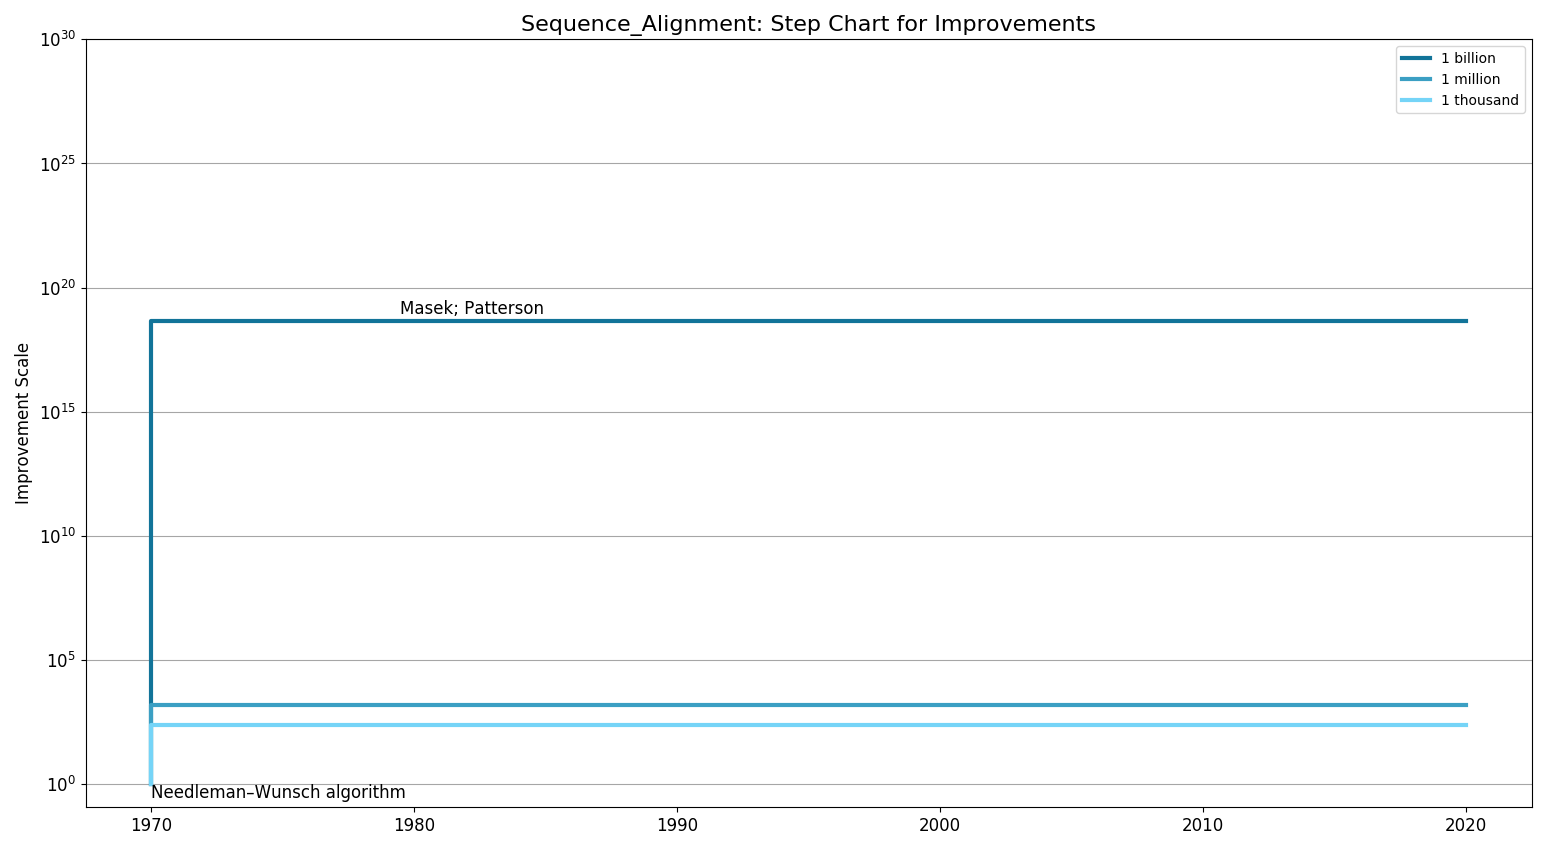 File:Sequence AlignmentStepChart.png